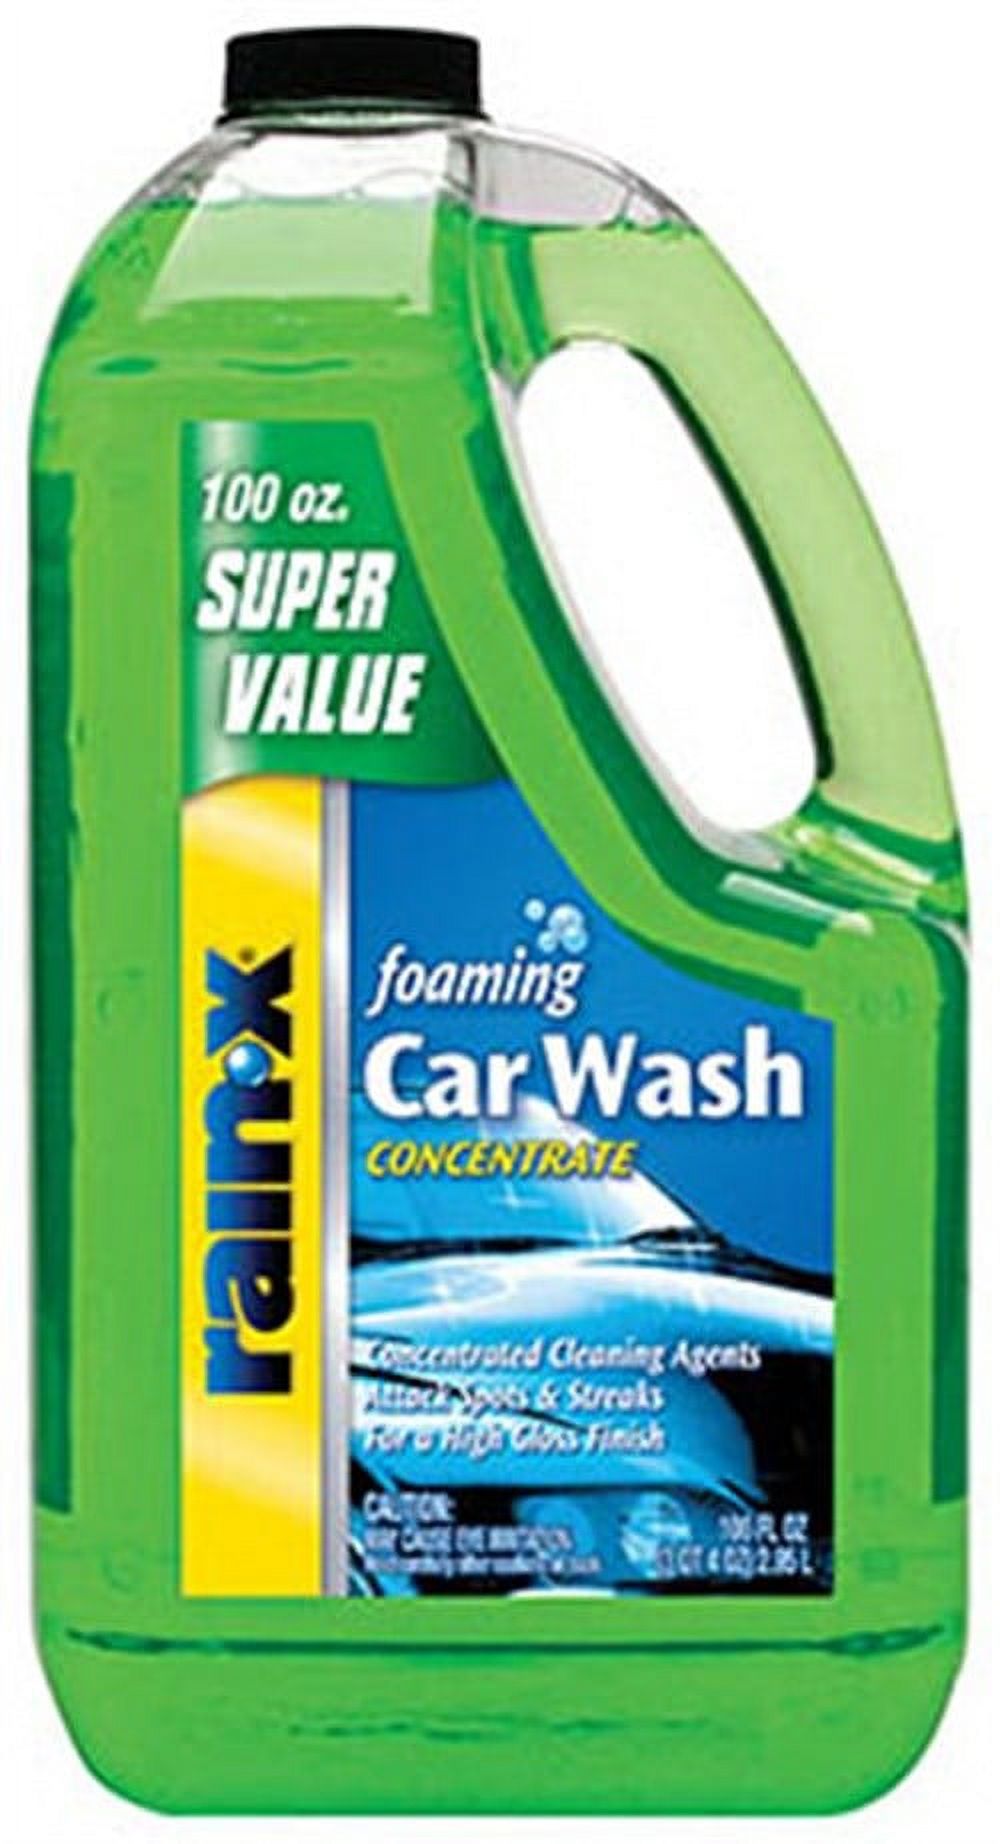 Rain-x Foaming Car Wash Concentrate, 100oz - 5072084W - image 2 of 2